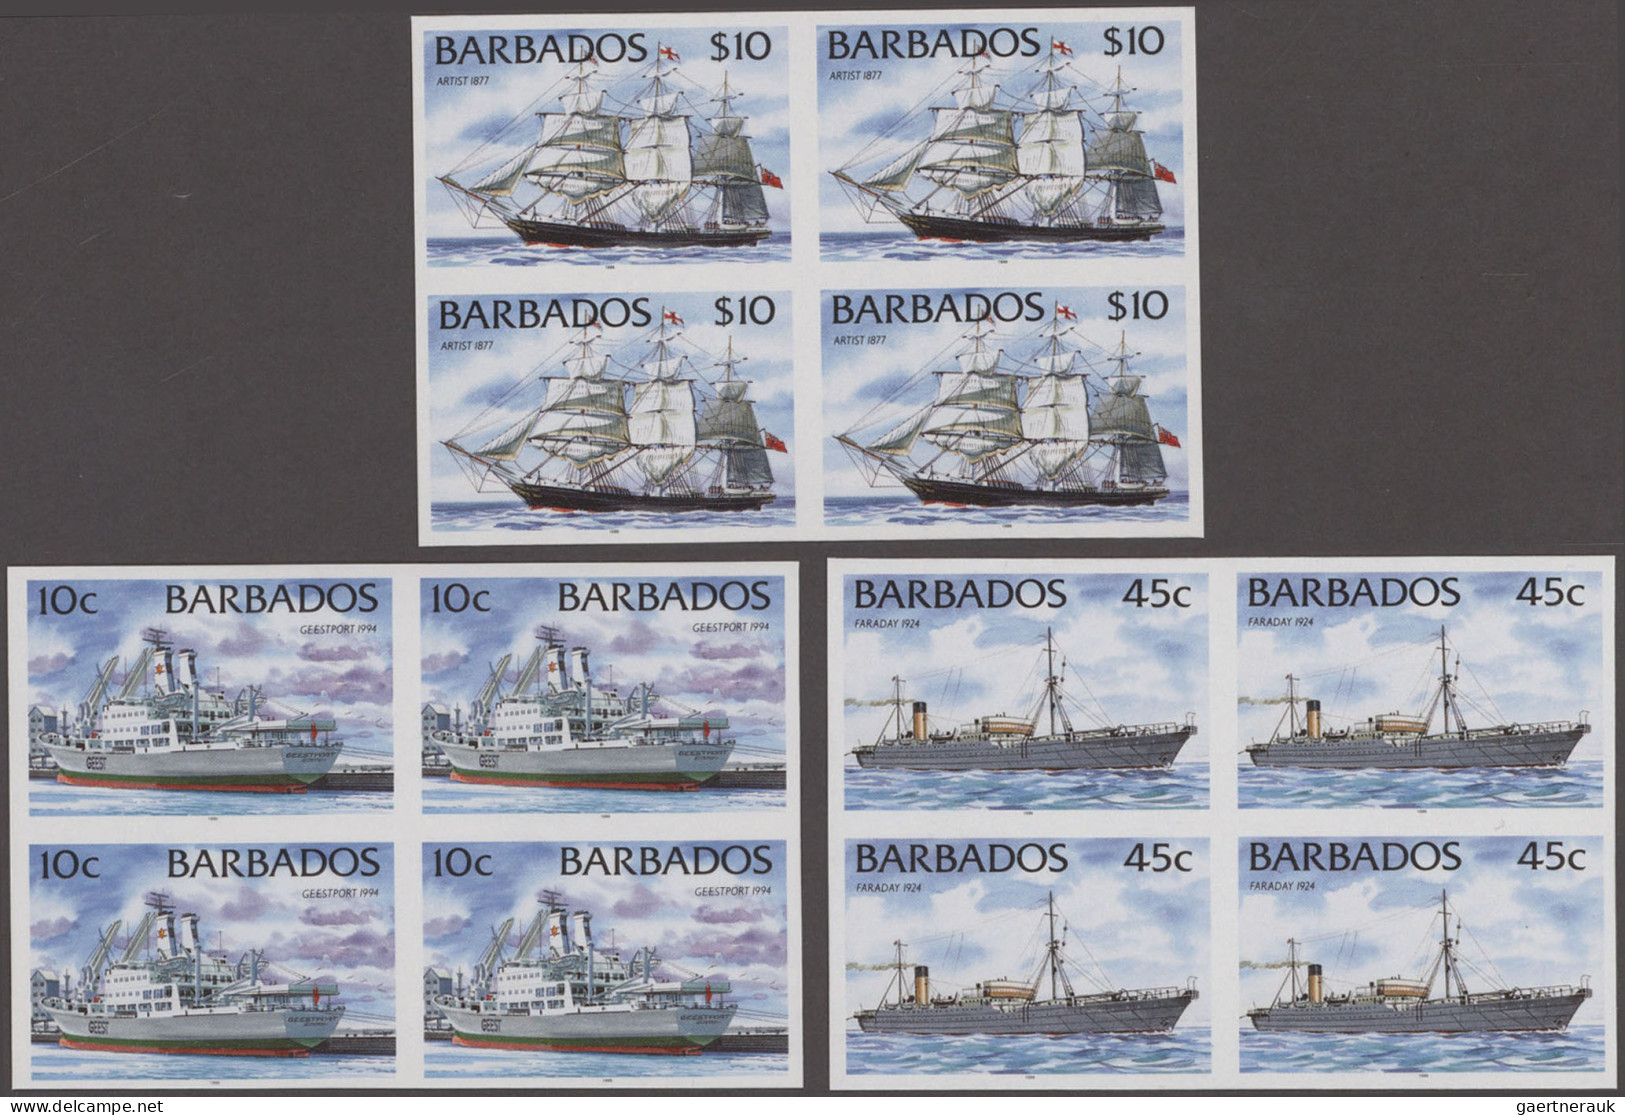 Barbados: 2001/2016. Collection containing 17857 IMPERFORATE stamps and 37 IMPER